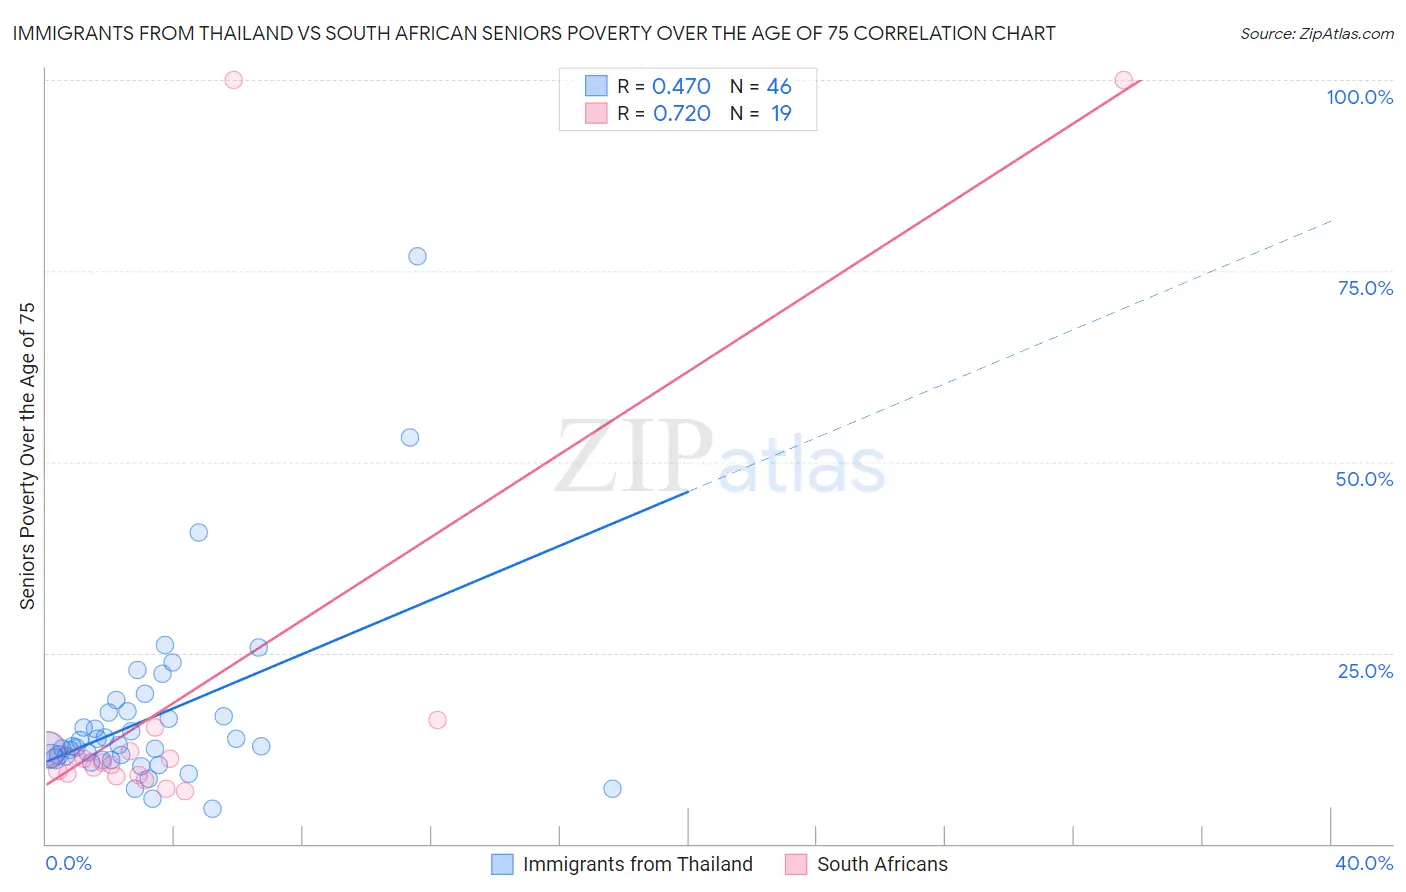 Immigrants from Thailand vs South African Seniors Poverty Over the Age of 75